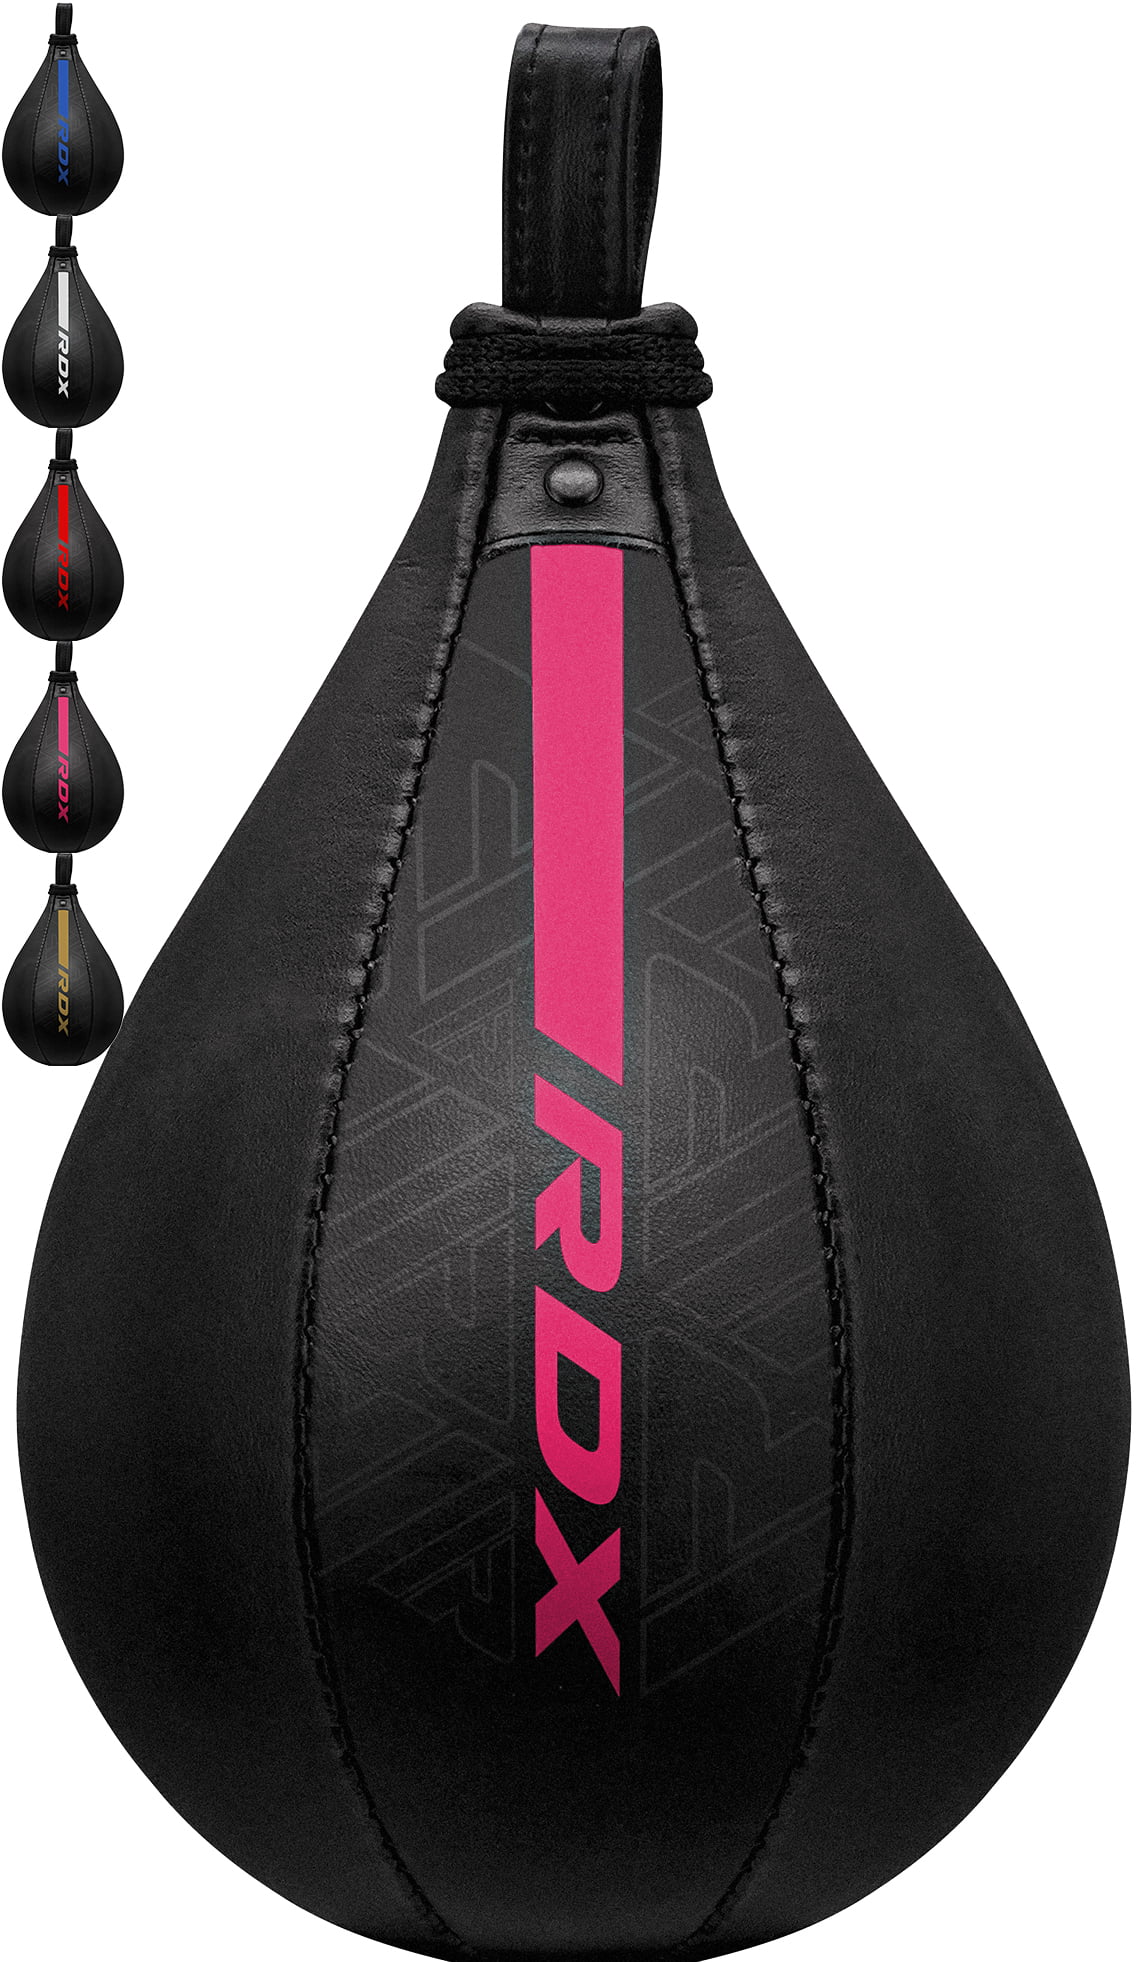 Inflatable Boxing Speed Ball Hanging Bag MMA Punching Training Equipment New 